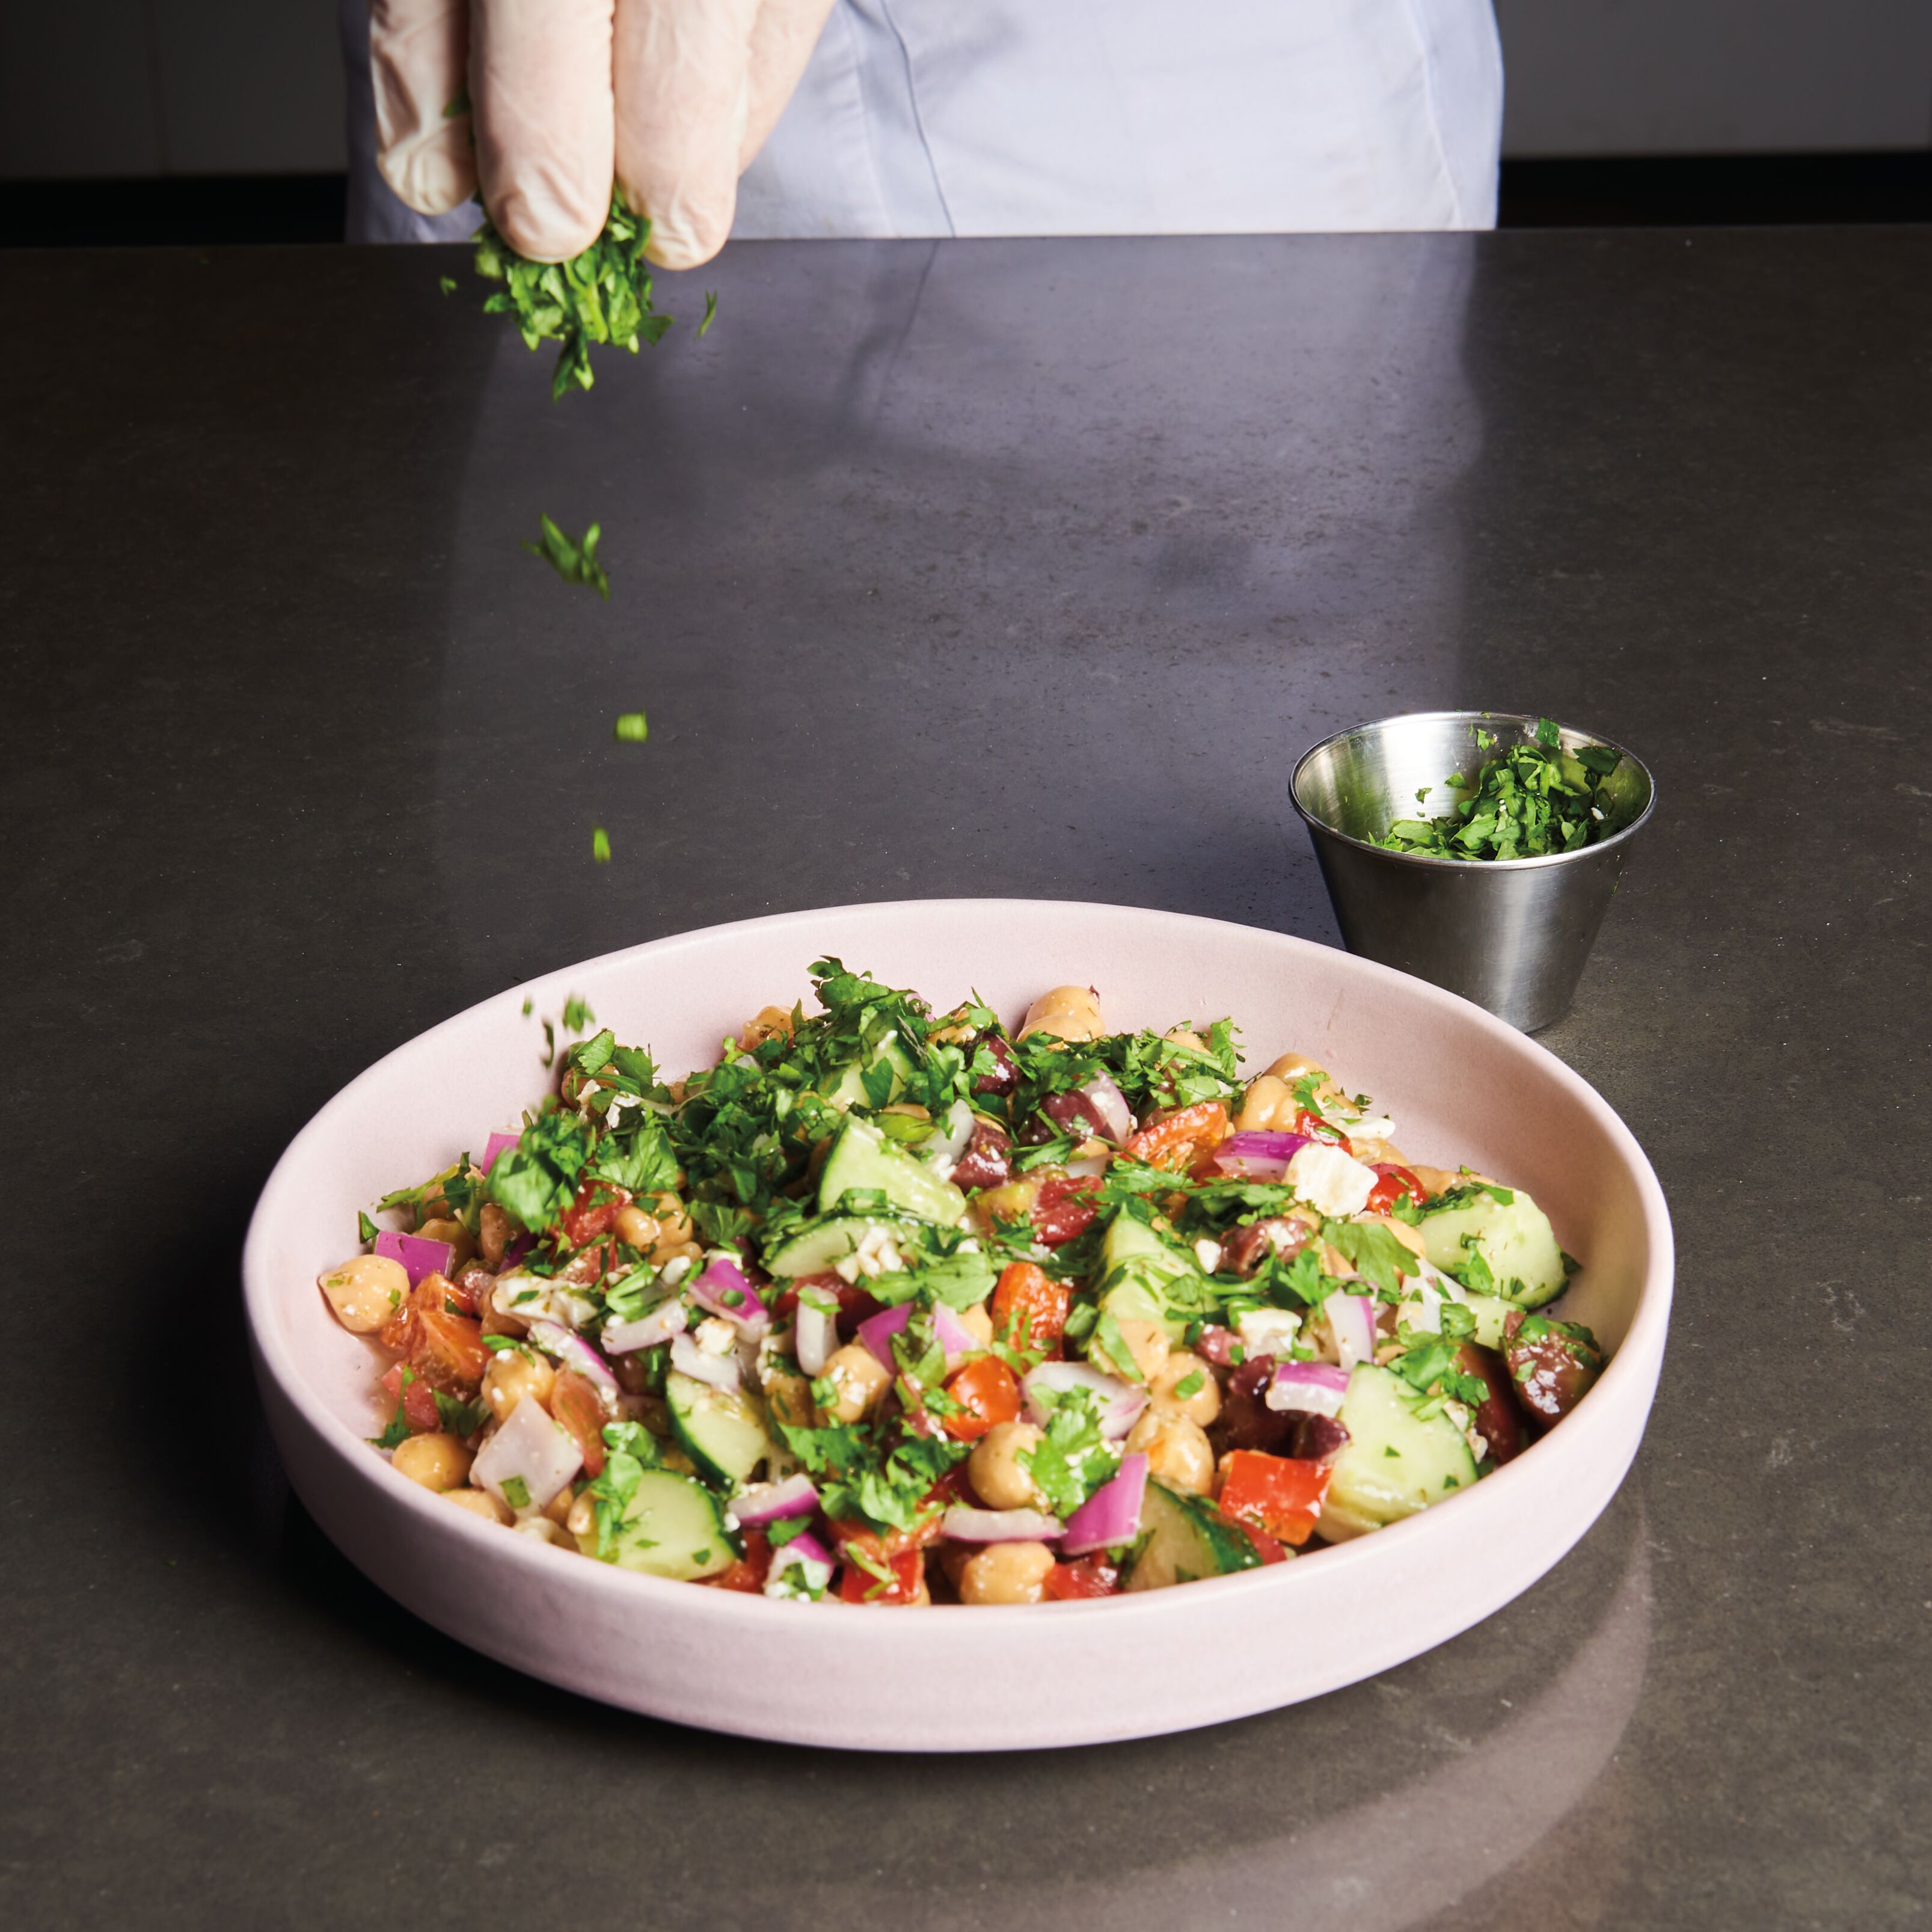 chef's hand sprinkling parsley over a salad of chickpeas, cucumbers, red onion, tomato, and kalamata olives in a pink bowl